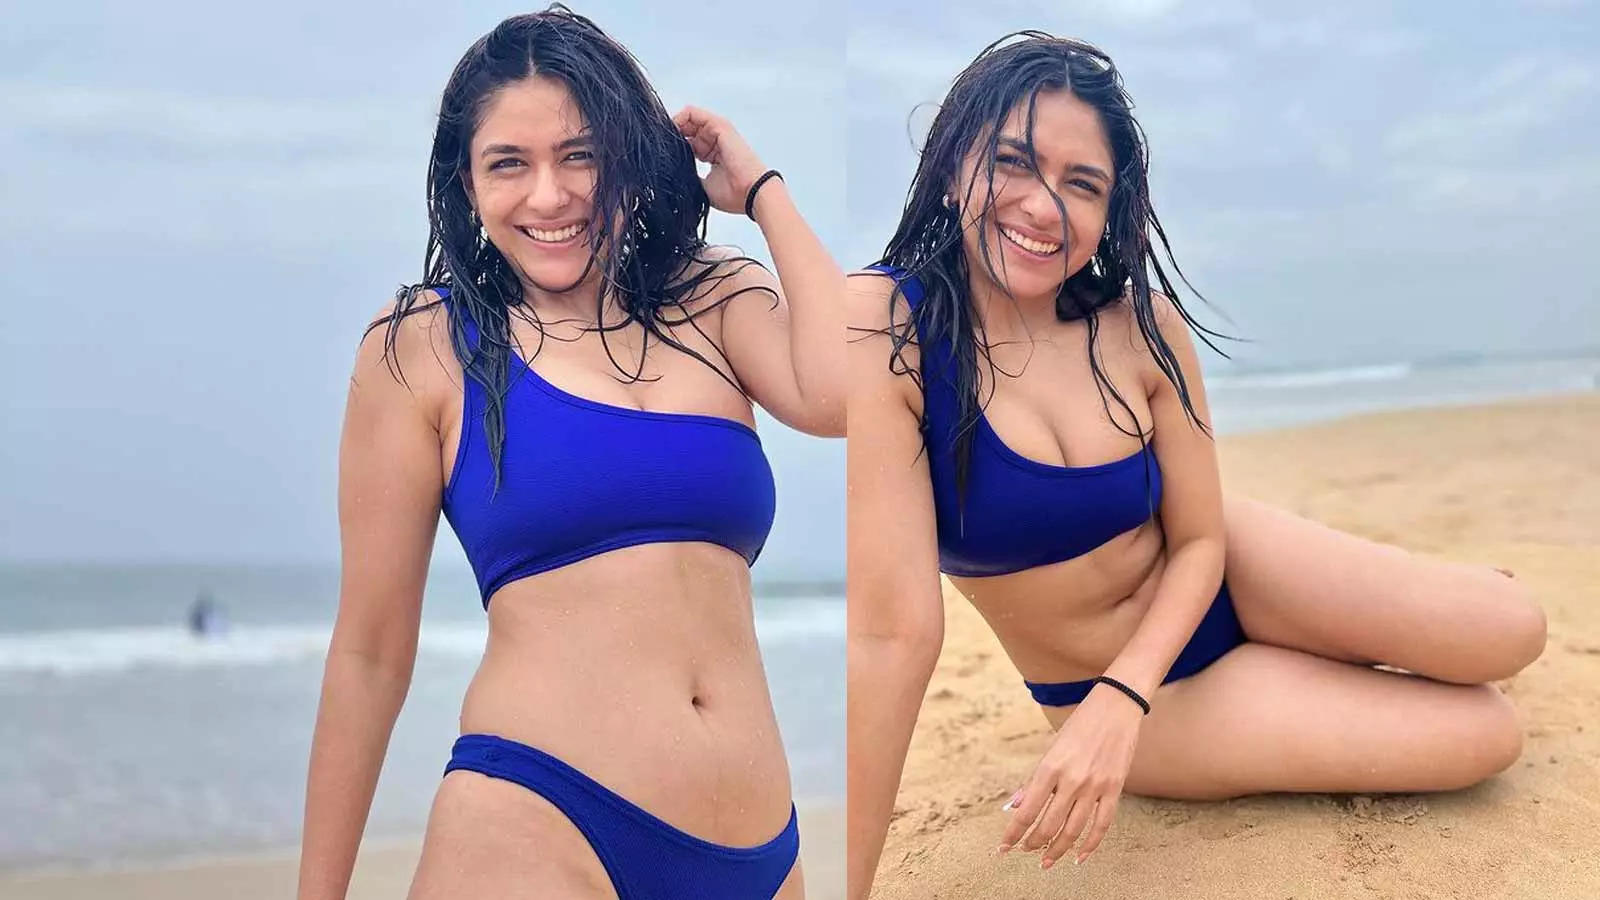 Mrunal Thakur Bikini Photo, Images, Pictures, Video Mrunal Thakur shares bikini photos from her beach vacation; fans say This is not our Sita  photo